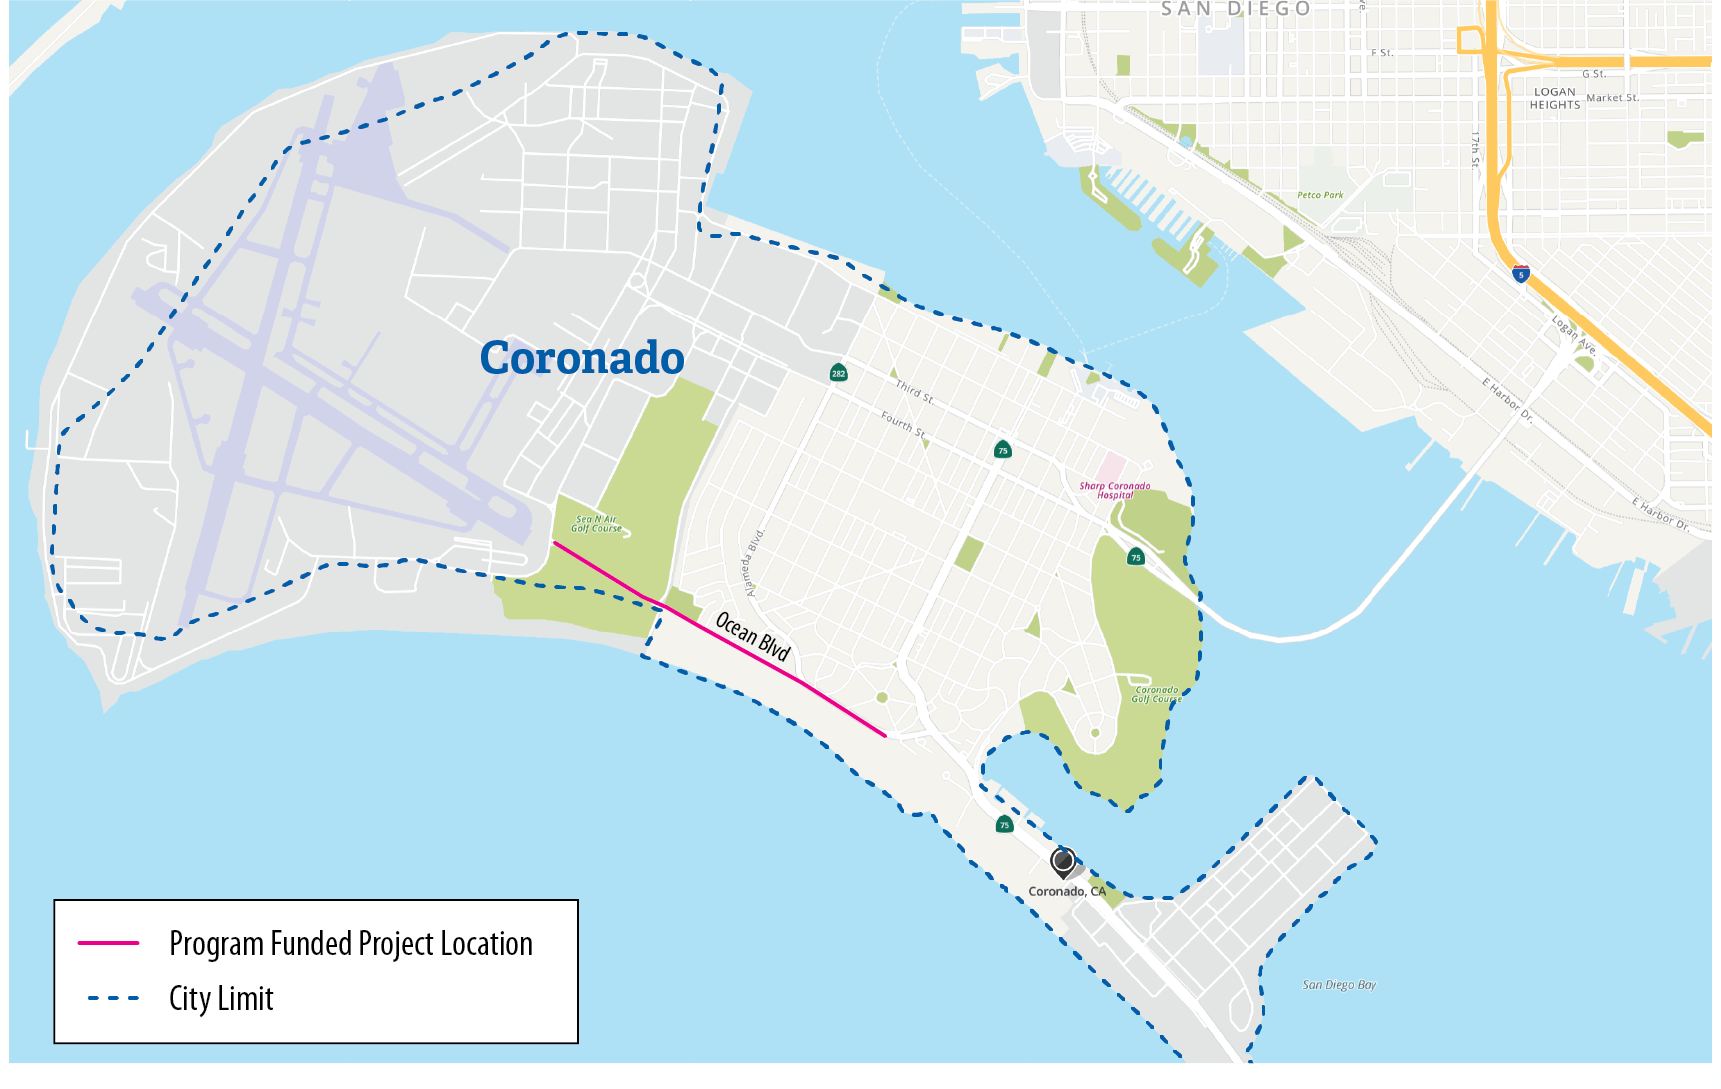 Figure A.3 is a map of the Coronado, showing that the City has no disadvantaged communities and its program funded project location.